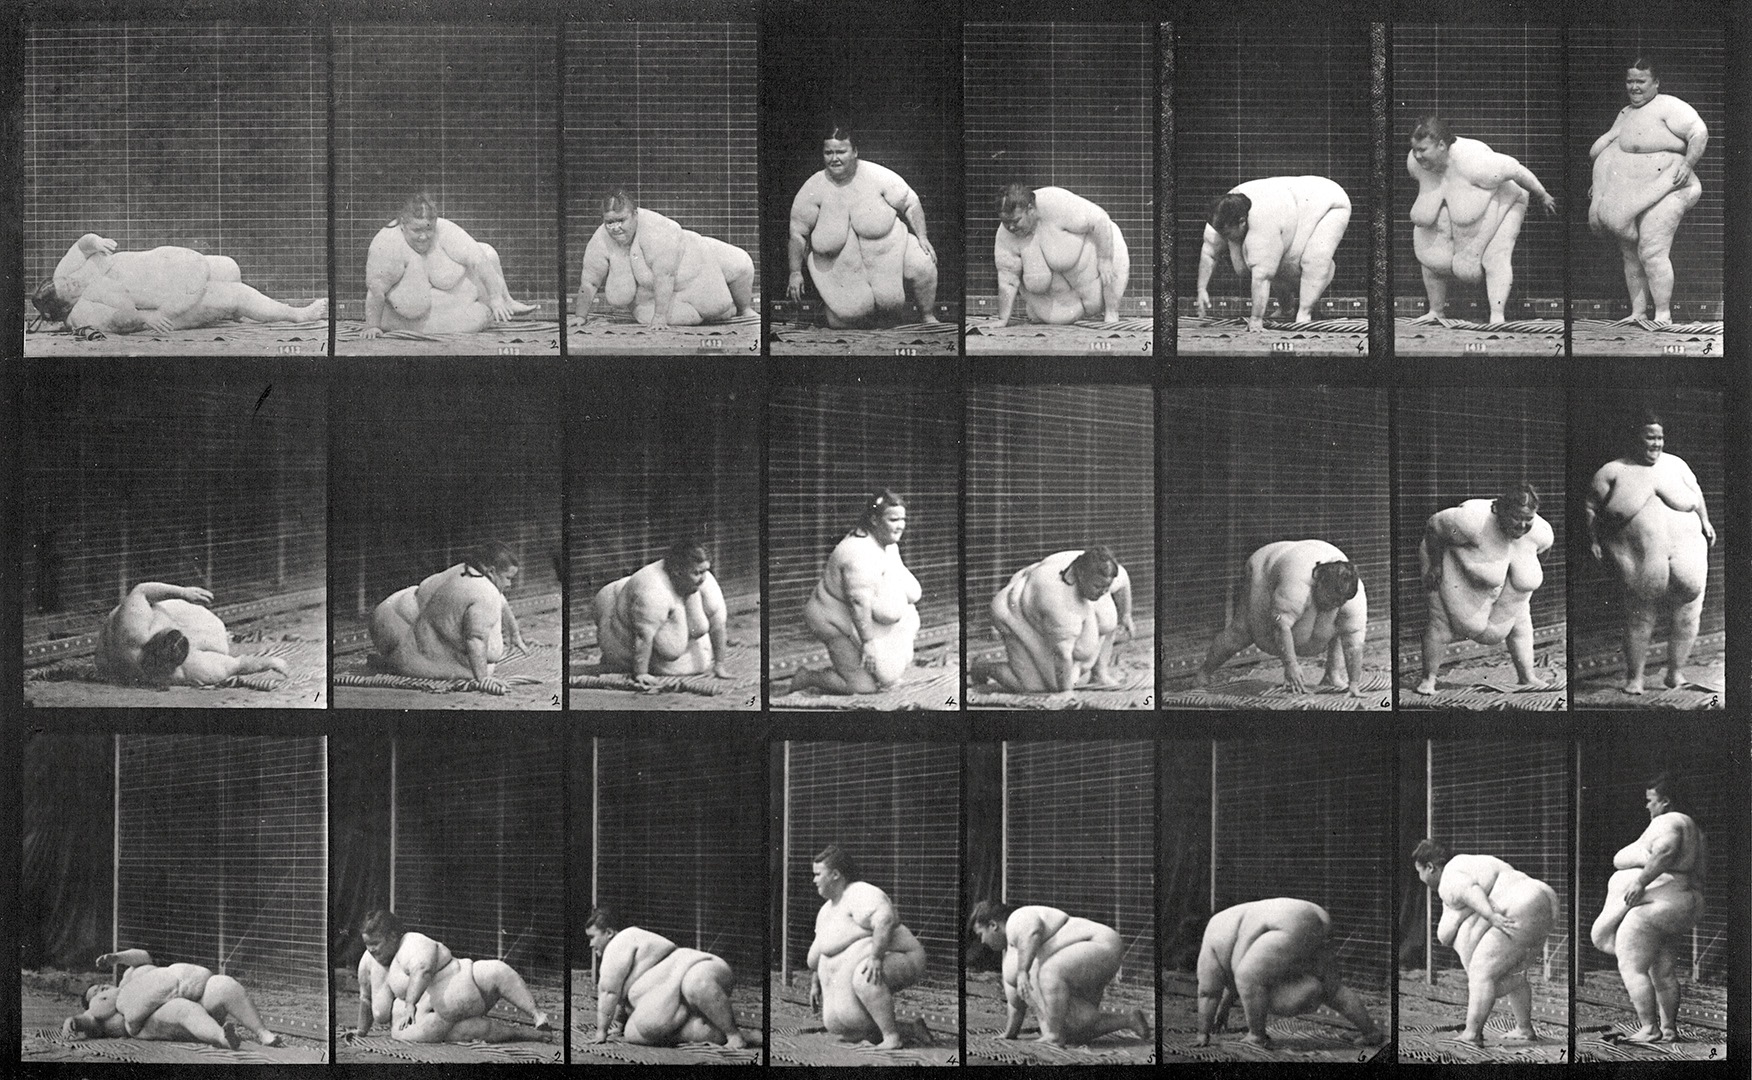 Sequence of black and white photos showing the movements of a nude obese woman rising from the ground